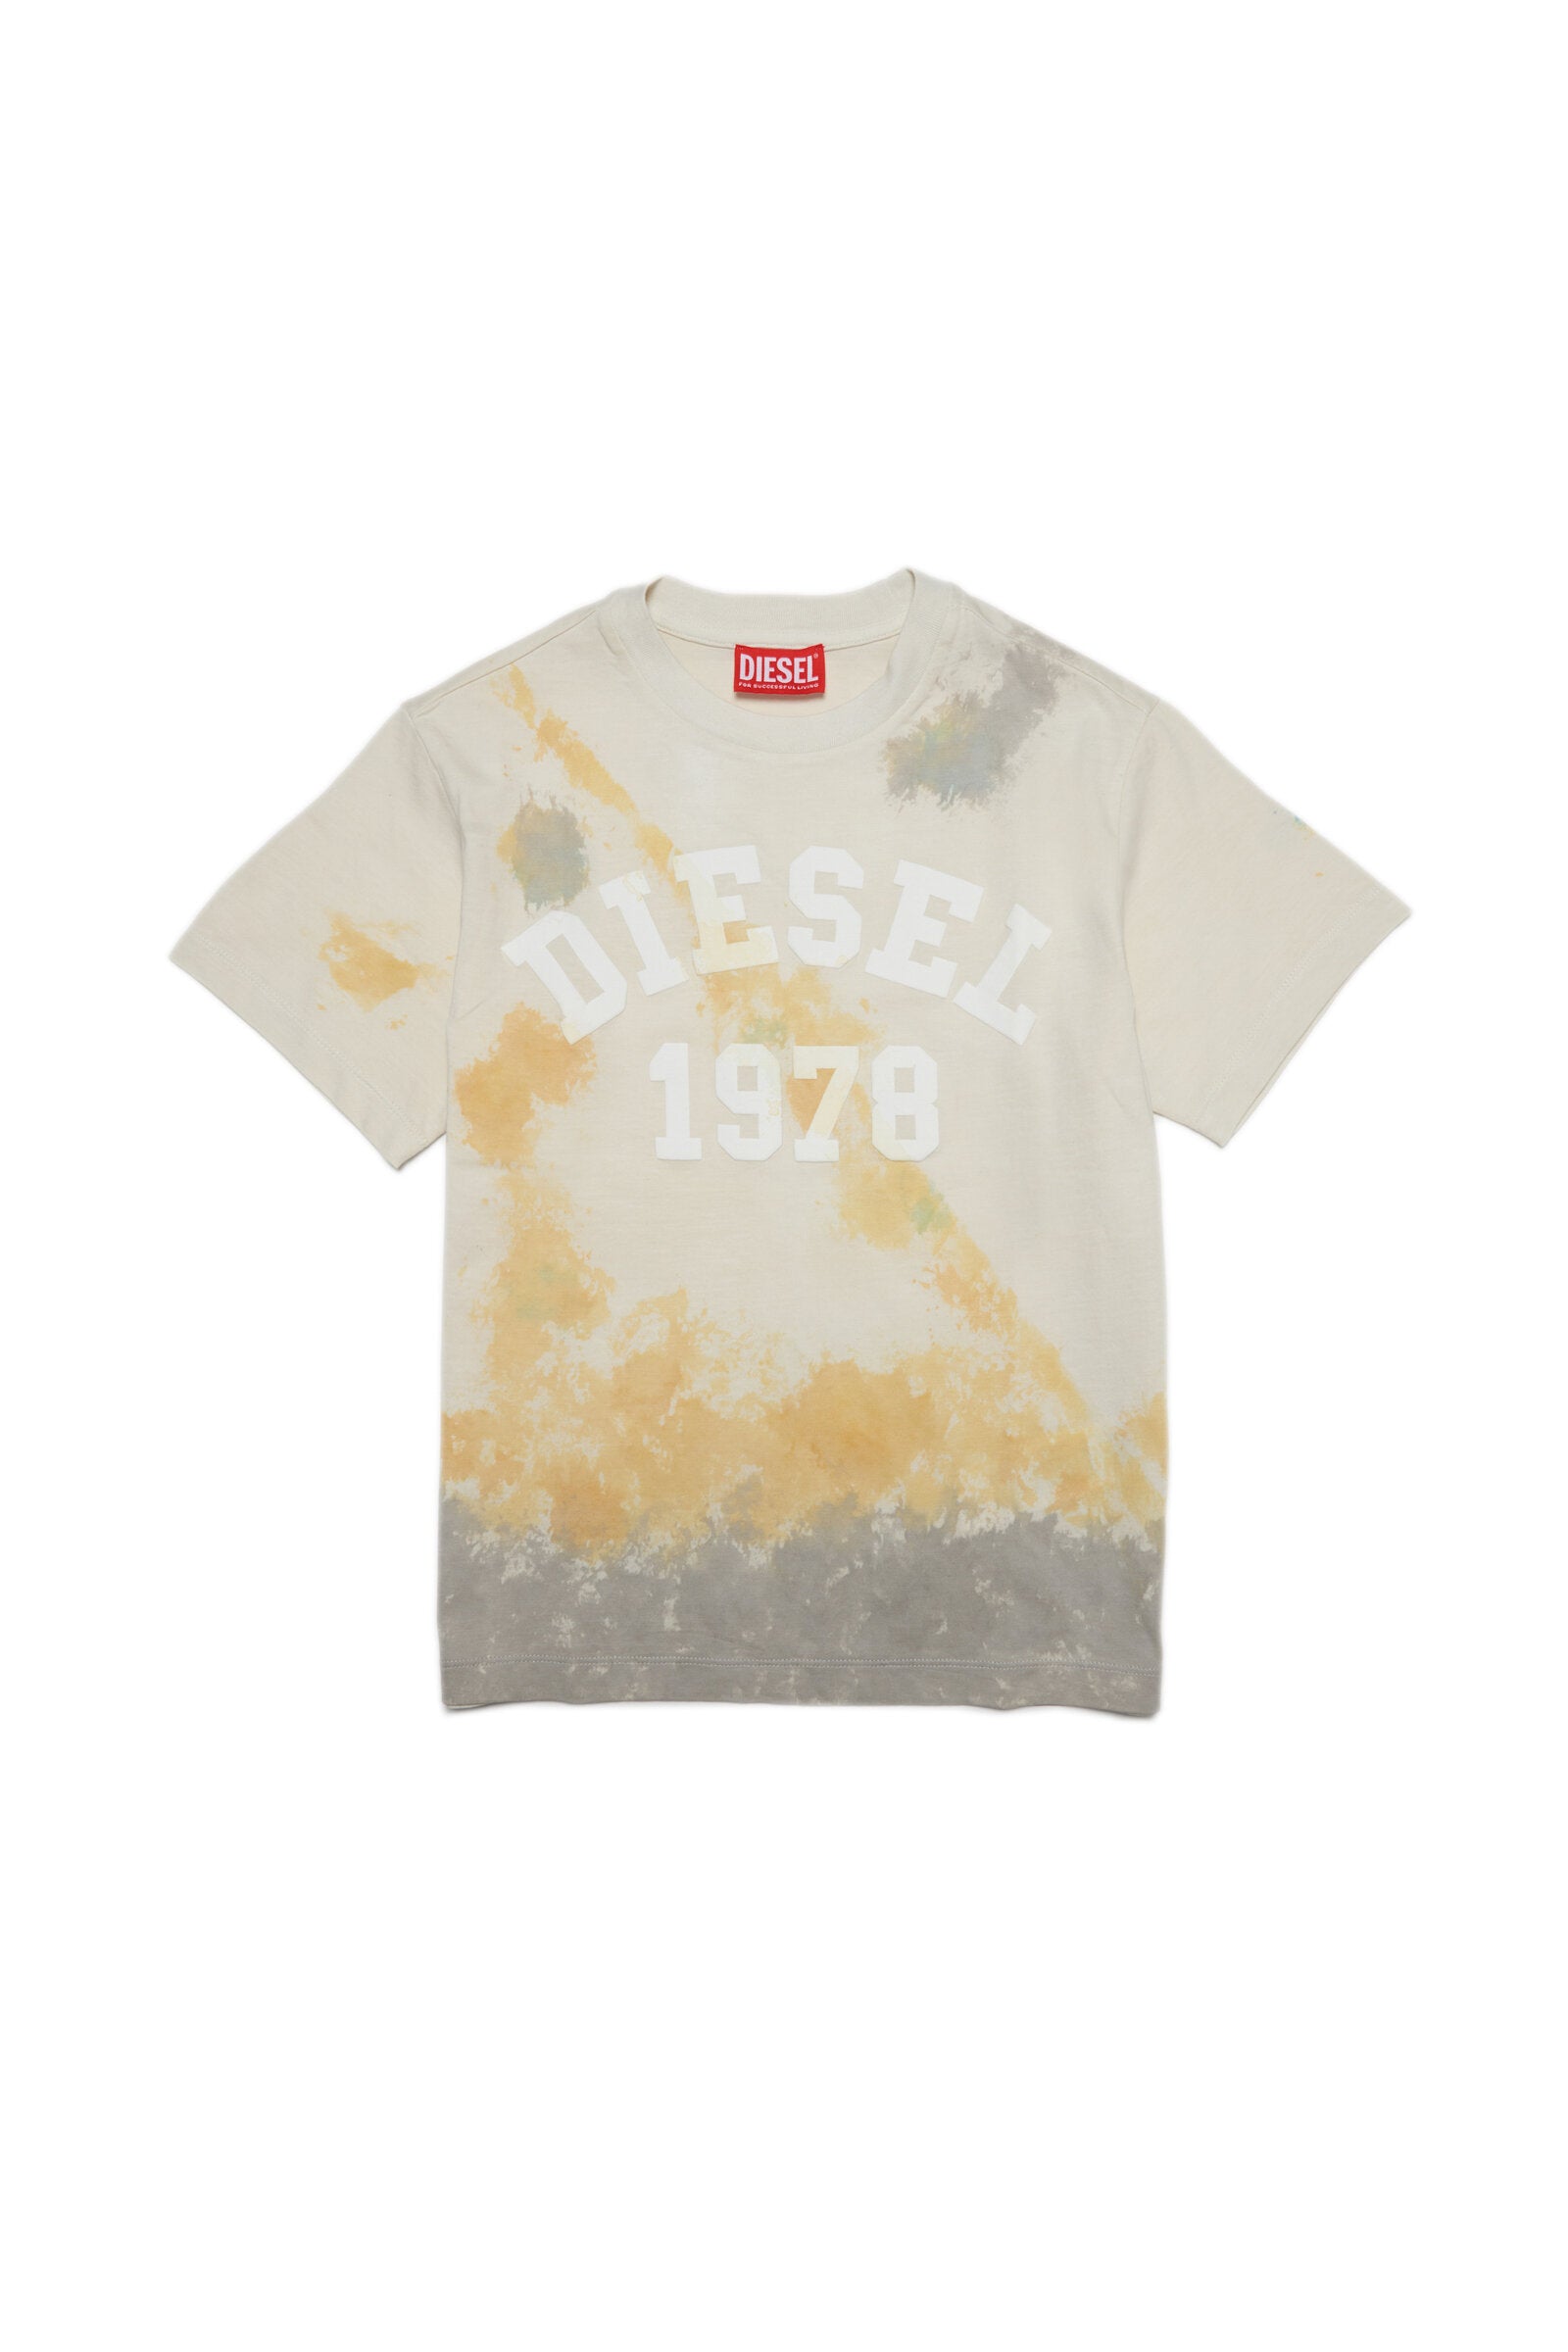 Gray jersey T-shirt with tie dye treatment